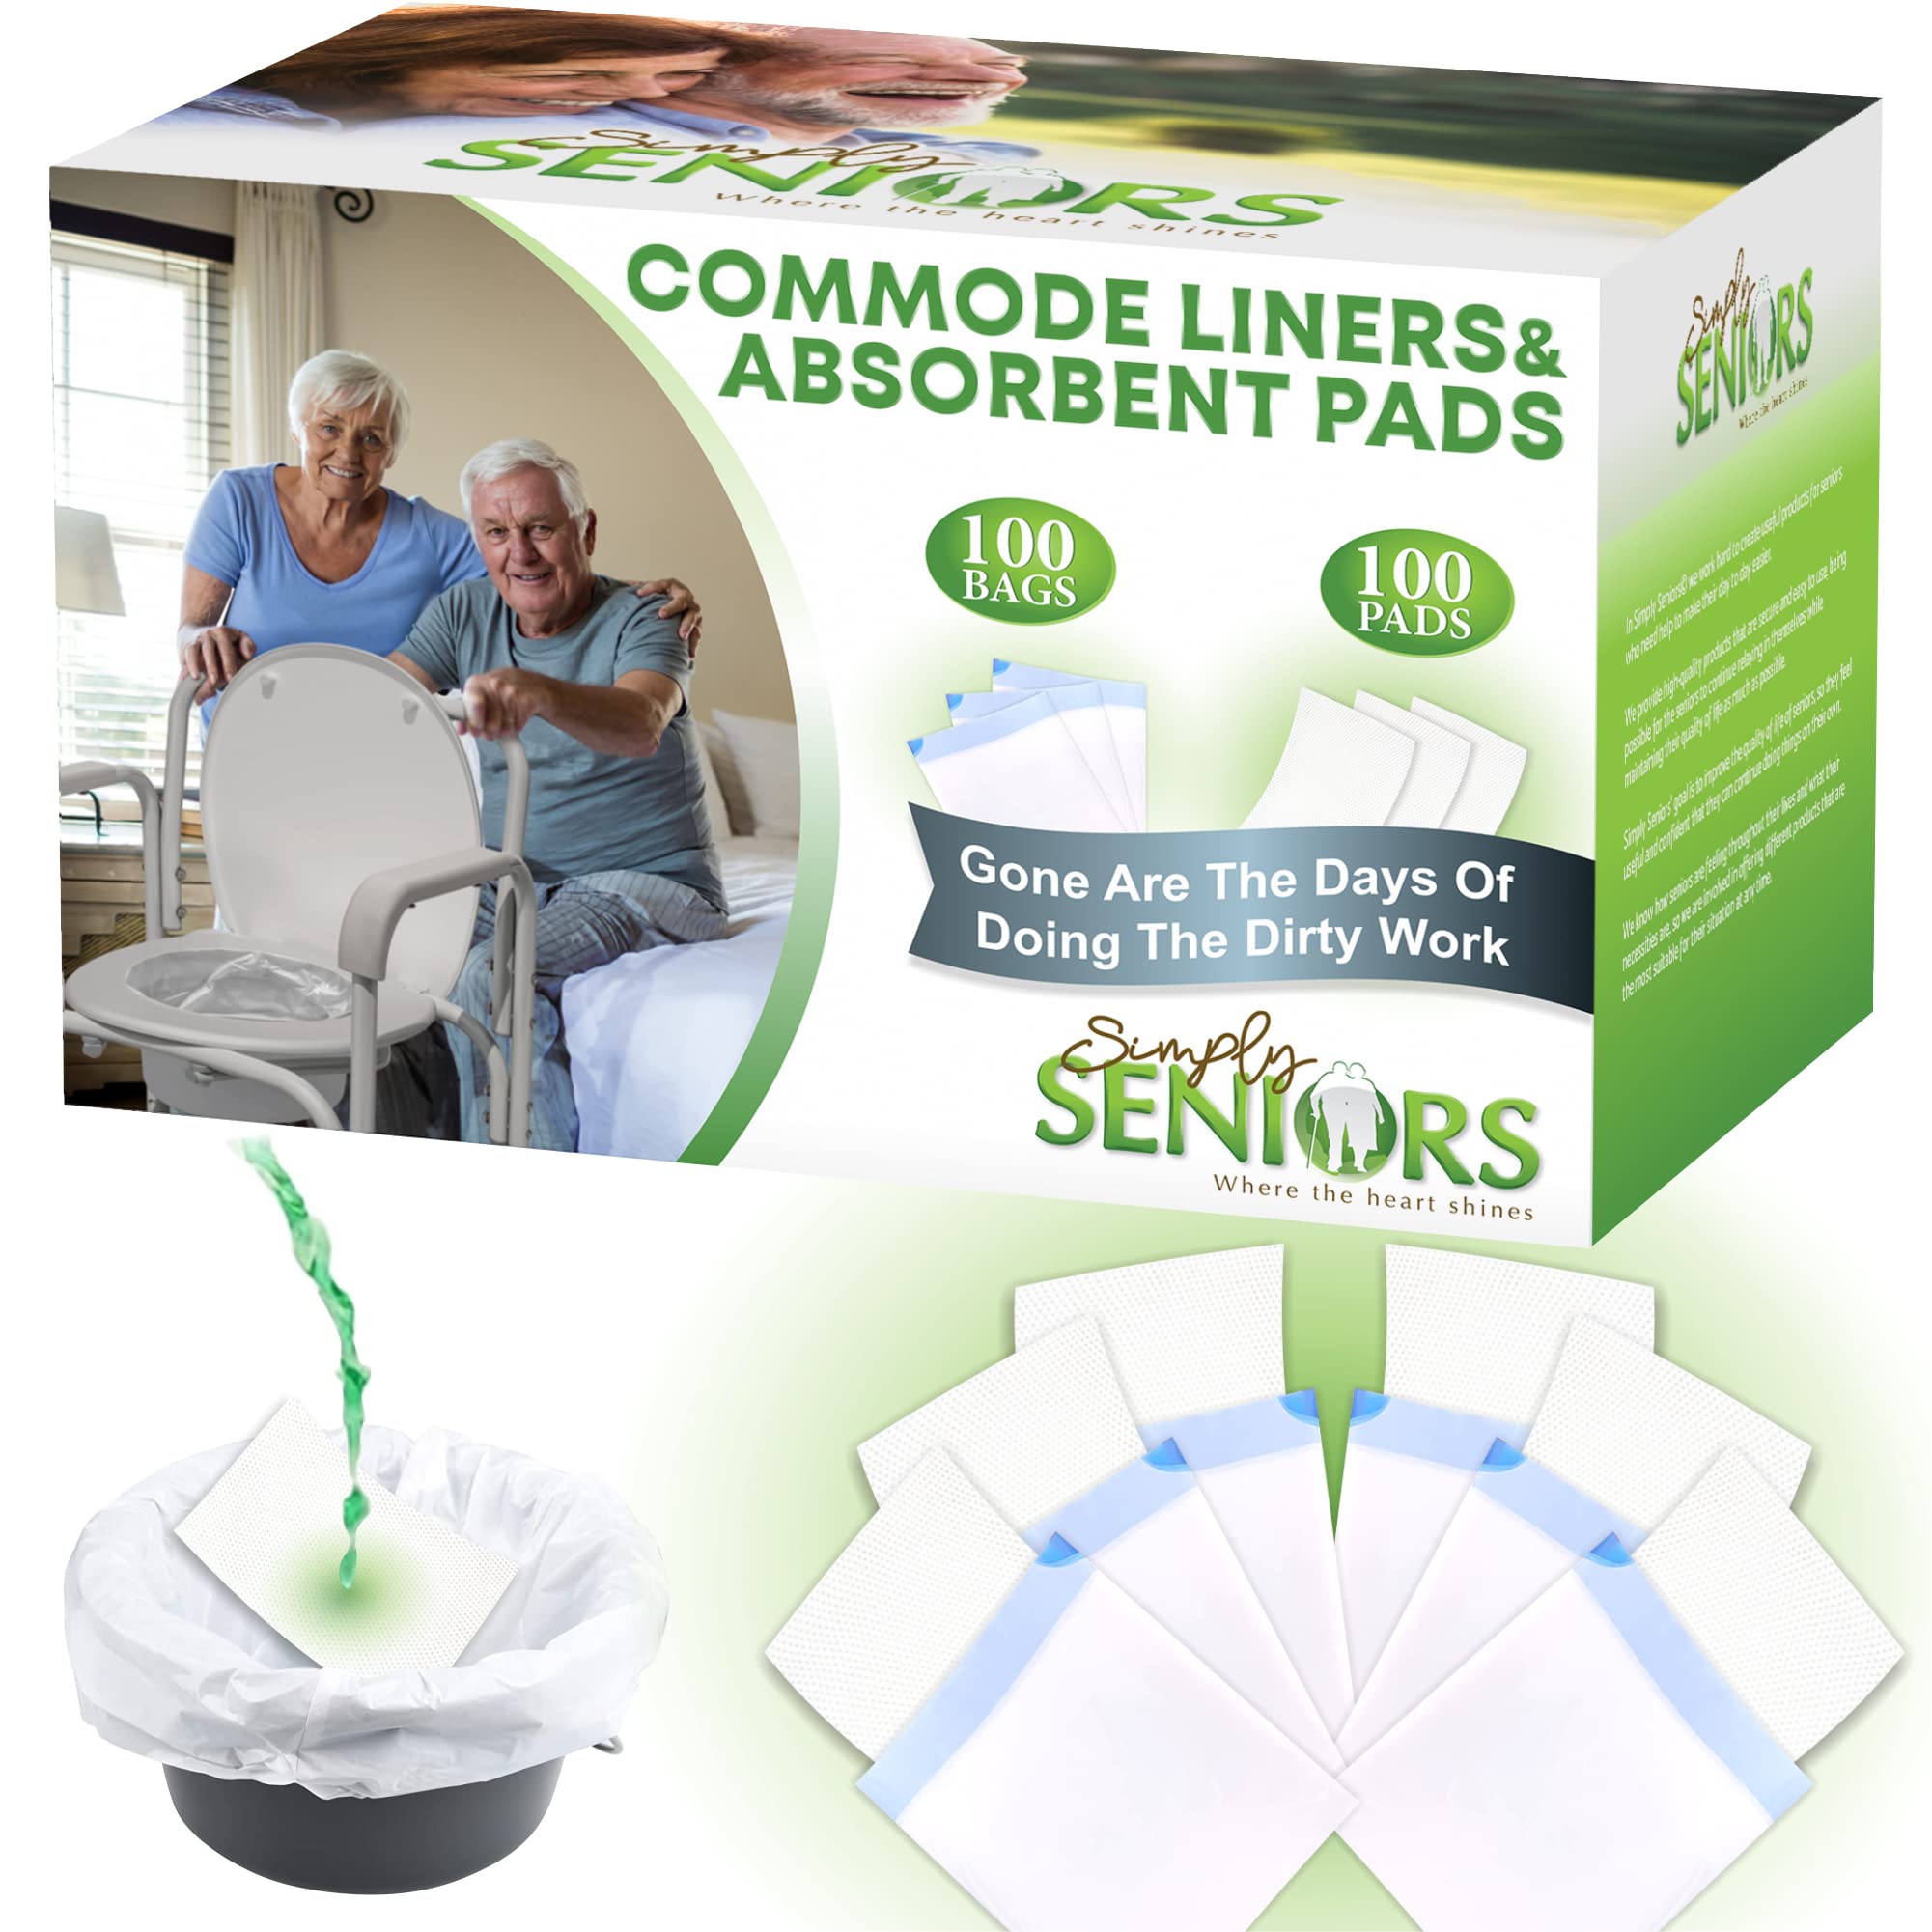 Commode Liners with Absorbent Pads & Gait Belt for Seniors - 100 Strong Portable Toilet Bags & Pads - Bedside Commode Liners Disposable - Transfer Gate Belts with Handles for Lifting Elderly & Patient